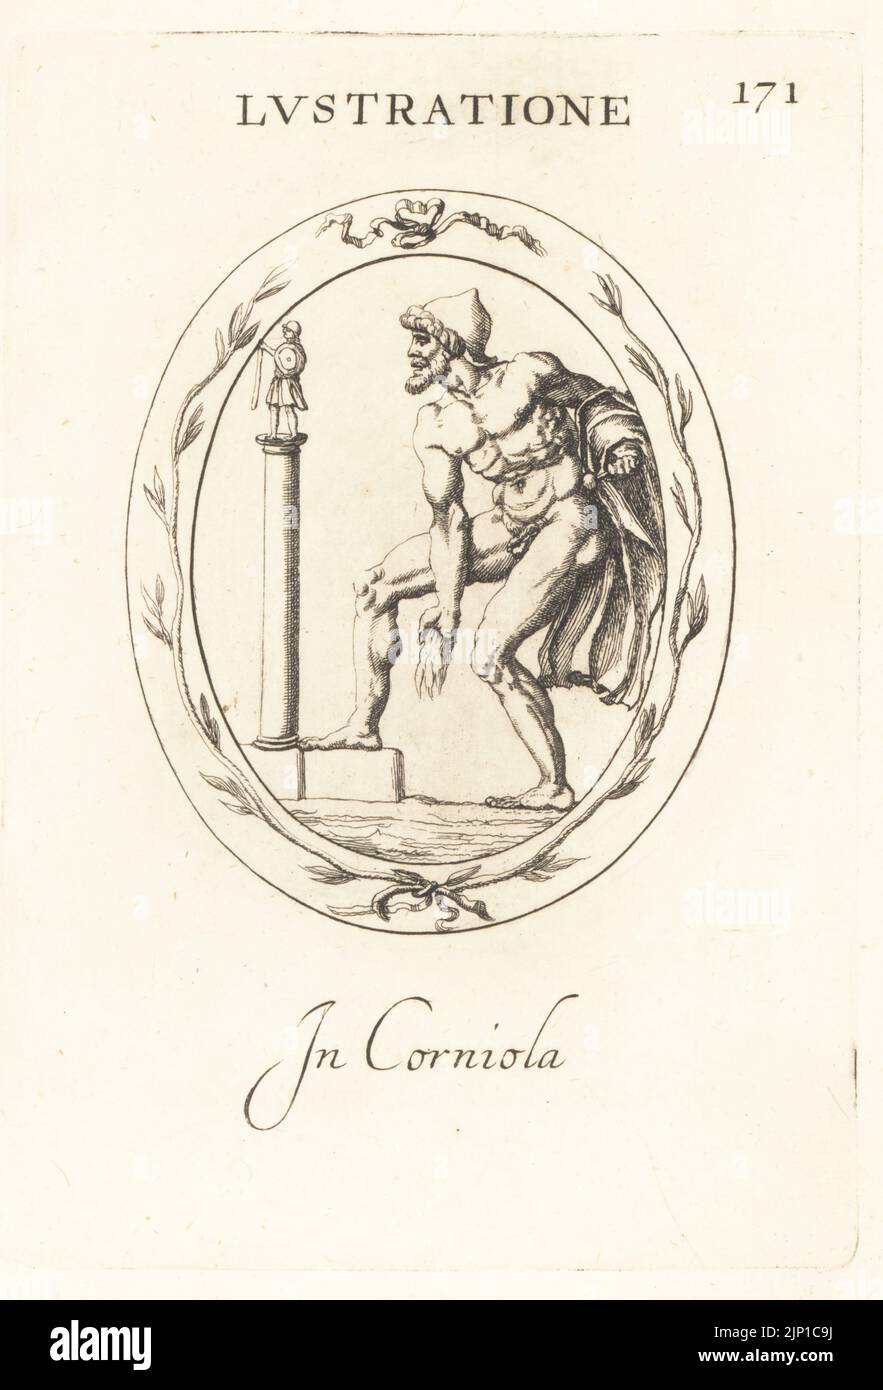 Roman priest performing a purification ritual or lustration. Naked Bellonarius with hat and cloak, washing himself in front of a column to Bellona, goddess of war. In carnelian. Lustratione. In corniola. Copperplate engraving by Giovanni Battista Galestruzzi after Leonardo Agostini from Gemmae et Sculpturae Antiquae Depicti ab Leonardo Augustino Senesi, Abraham Blooteling, Amsterdam, 1685. Stock Photo